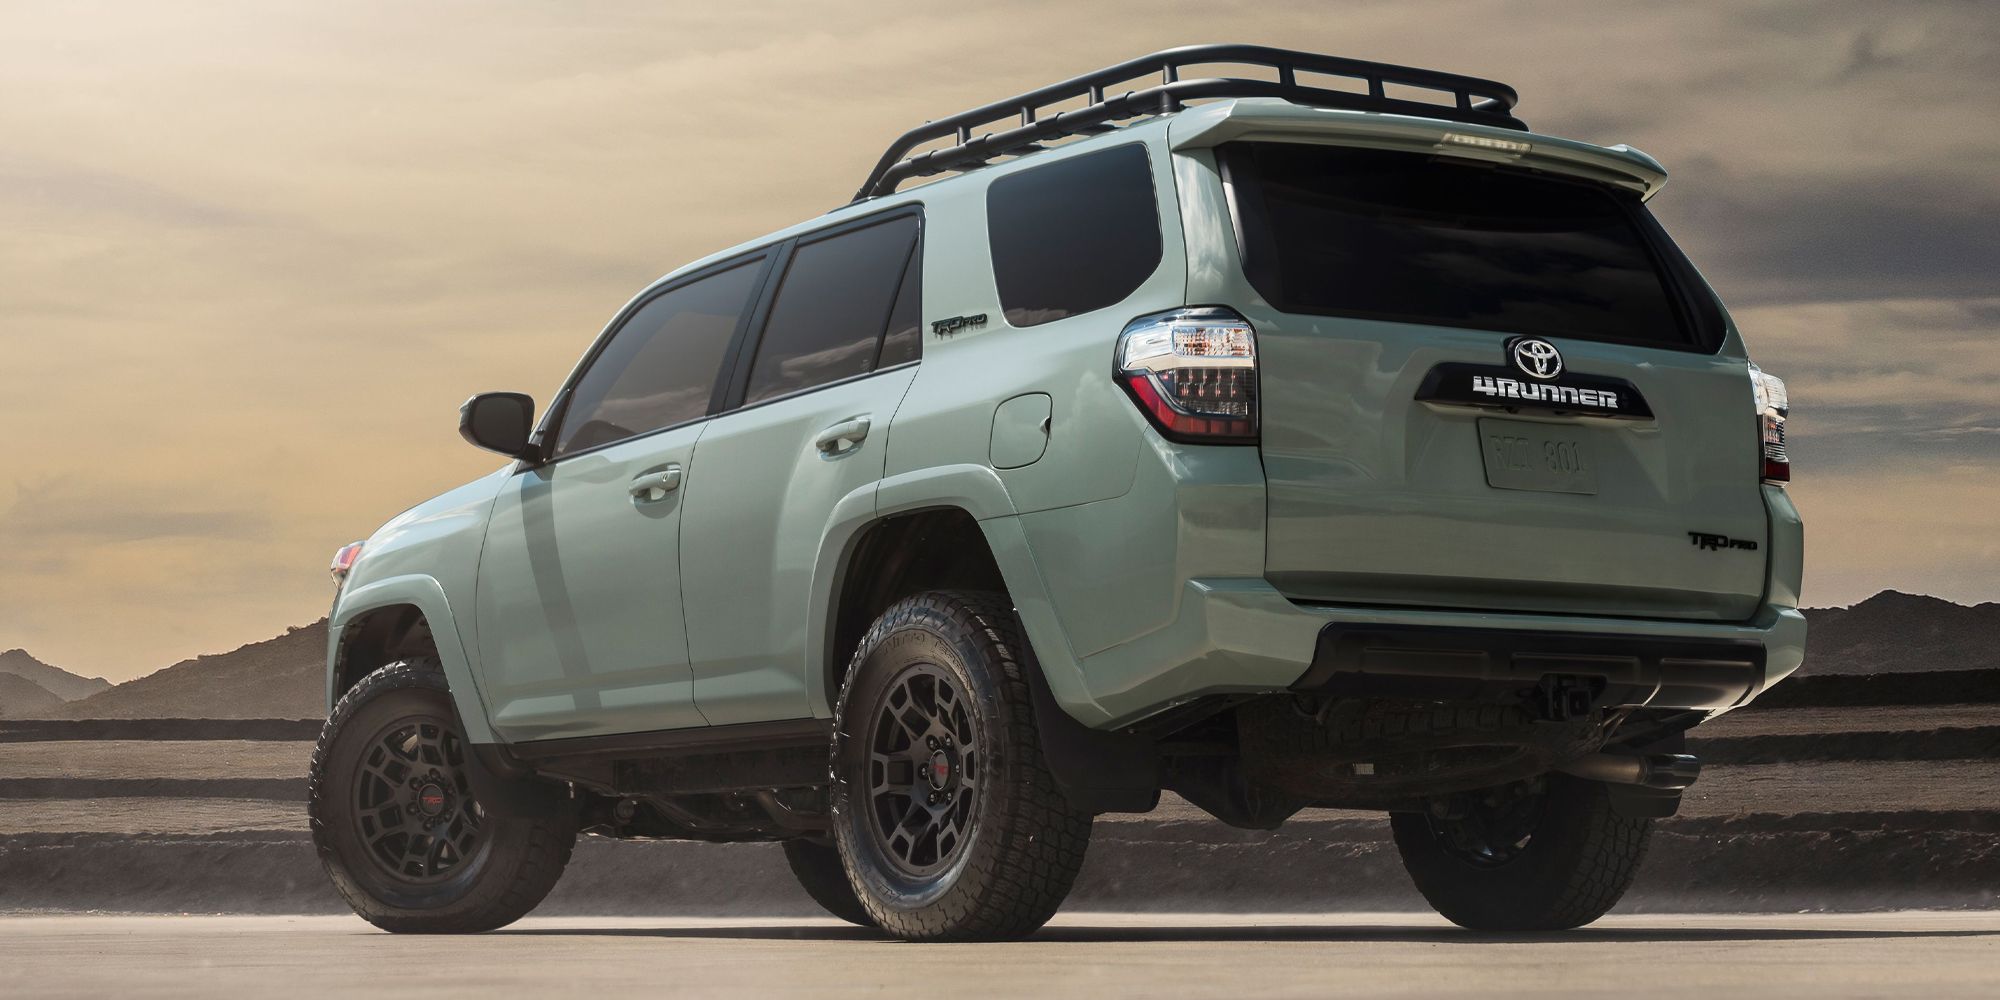 The rear of a green 4Runner TRD Pro